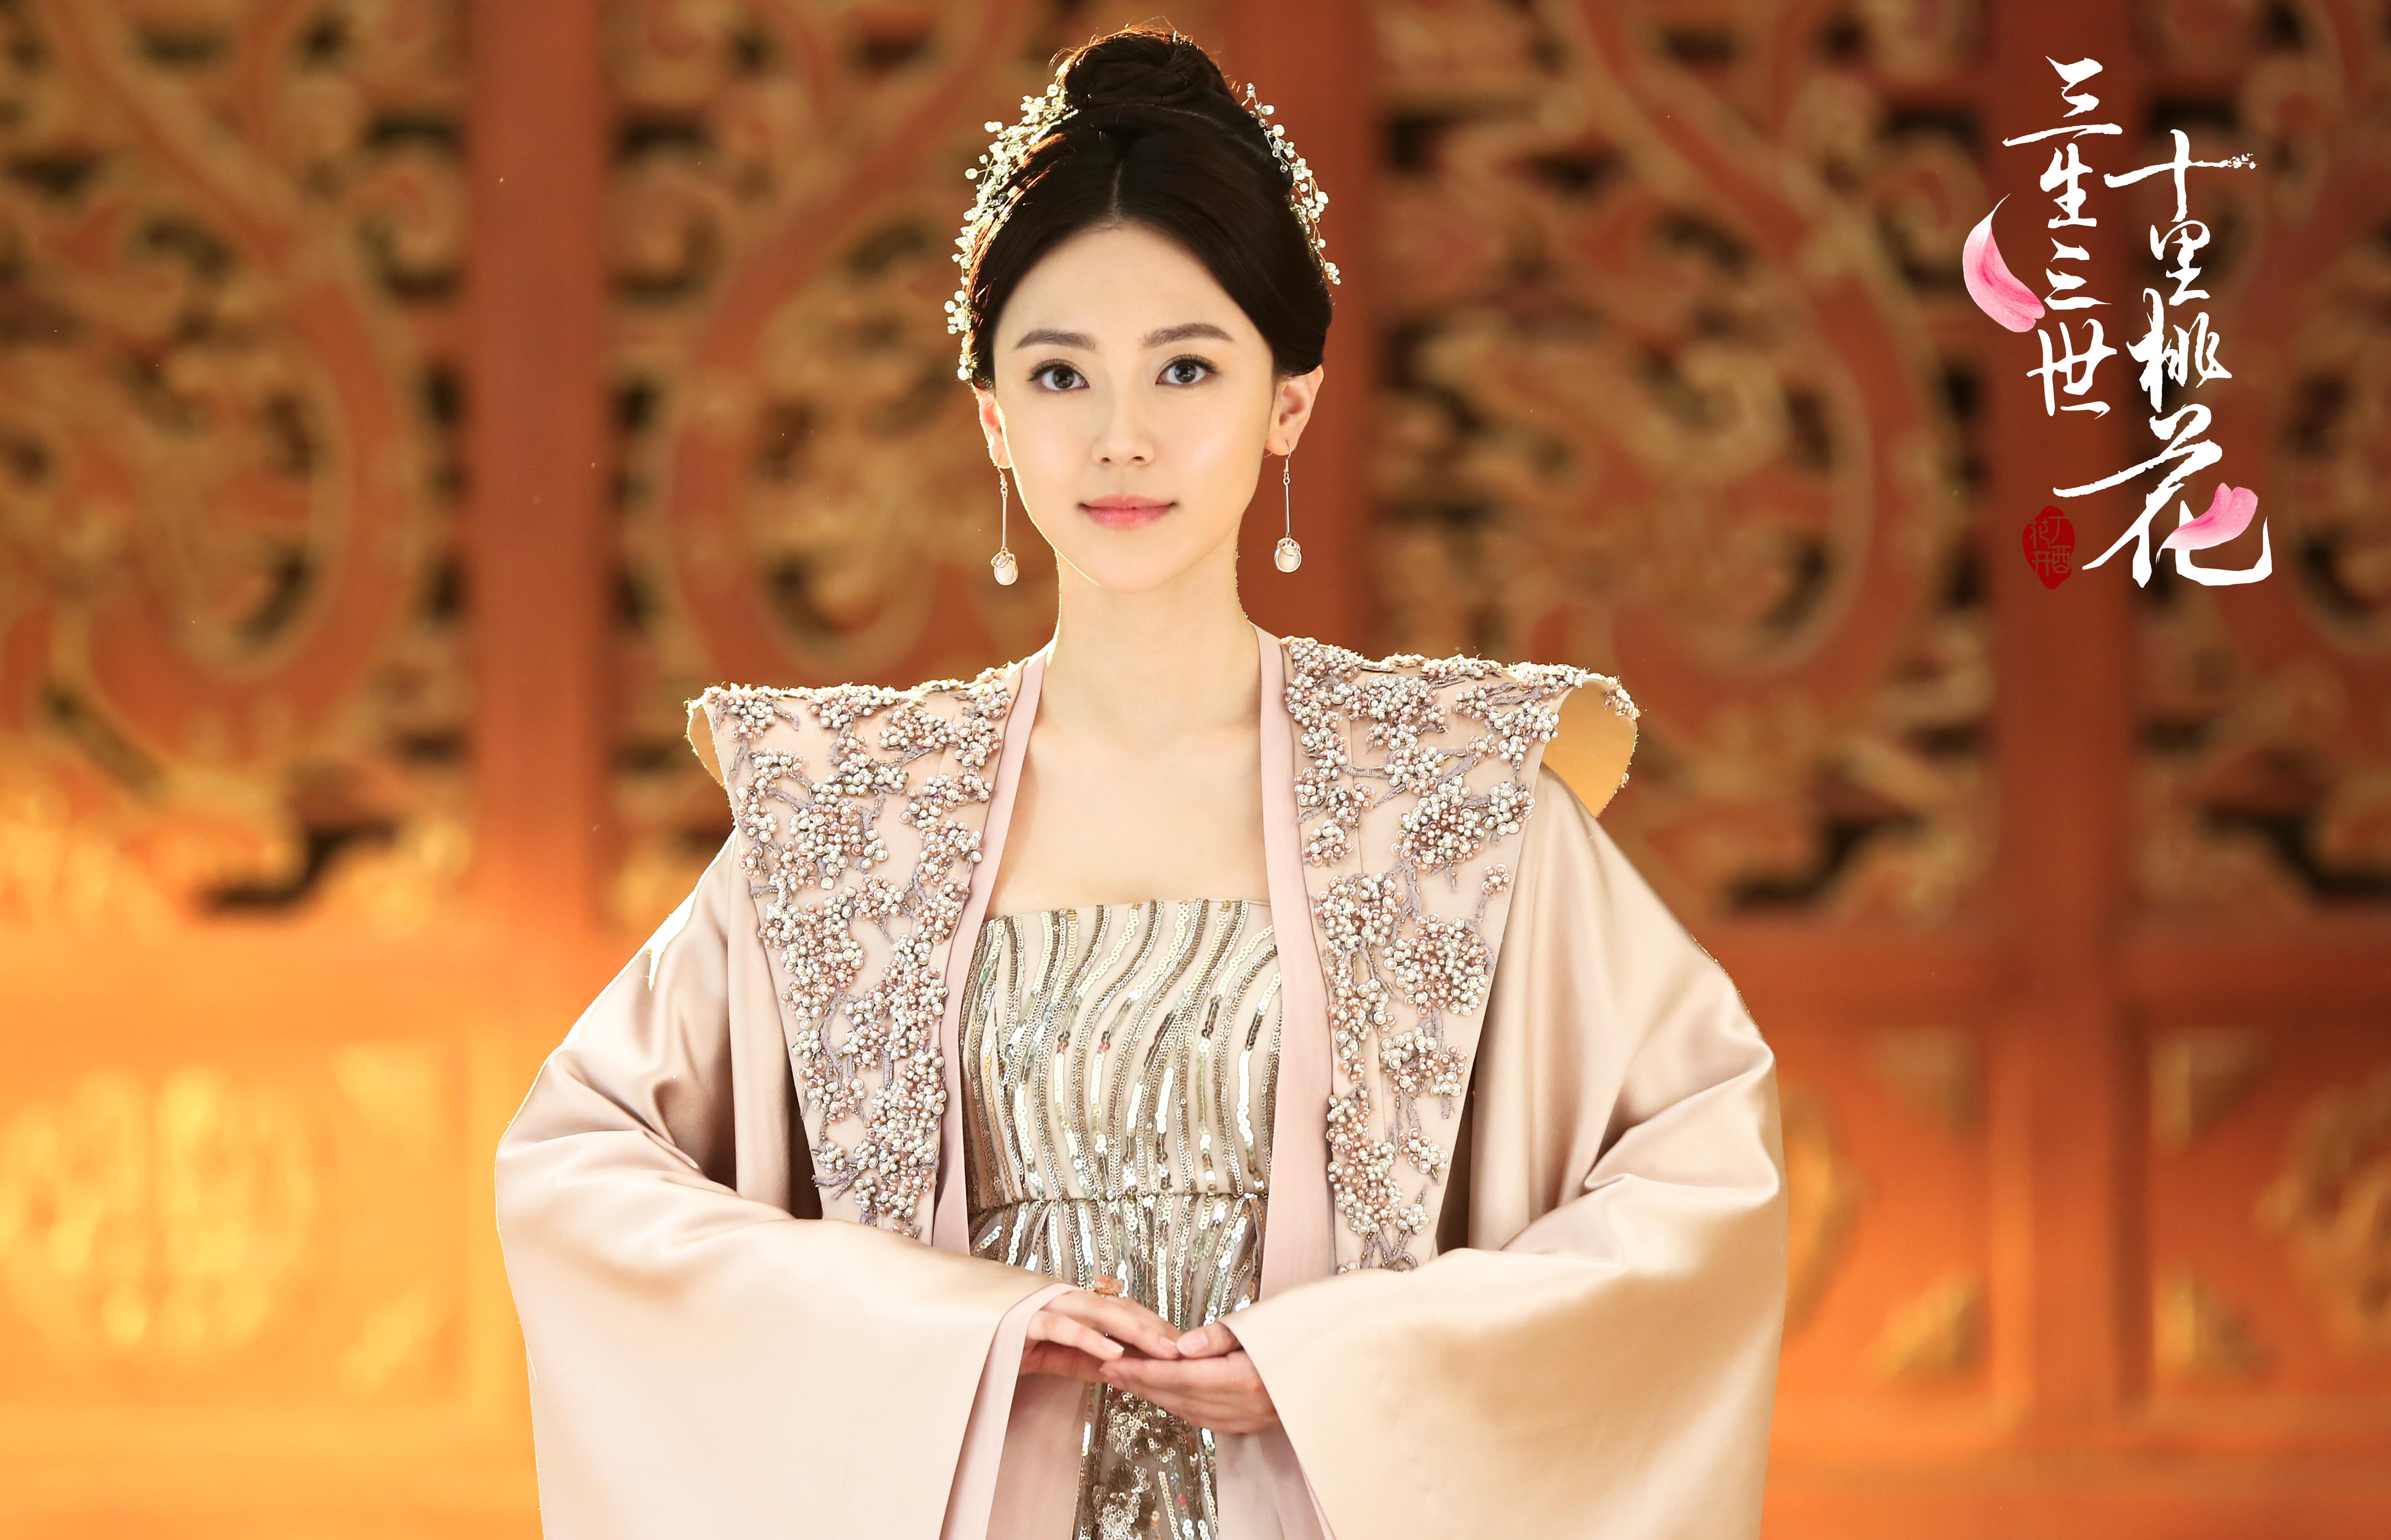 Meet 10 fascinating characters from Ten Miles of Peach Blossoms